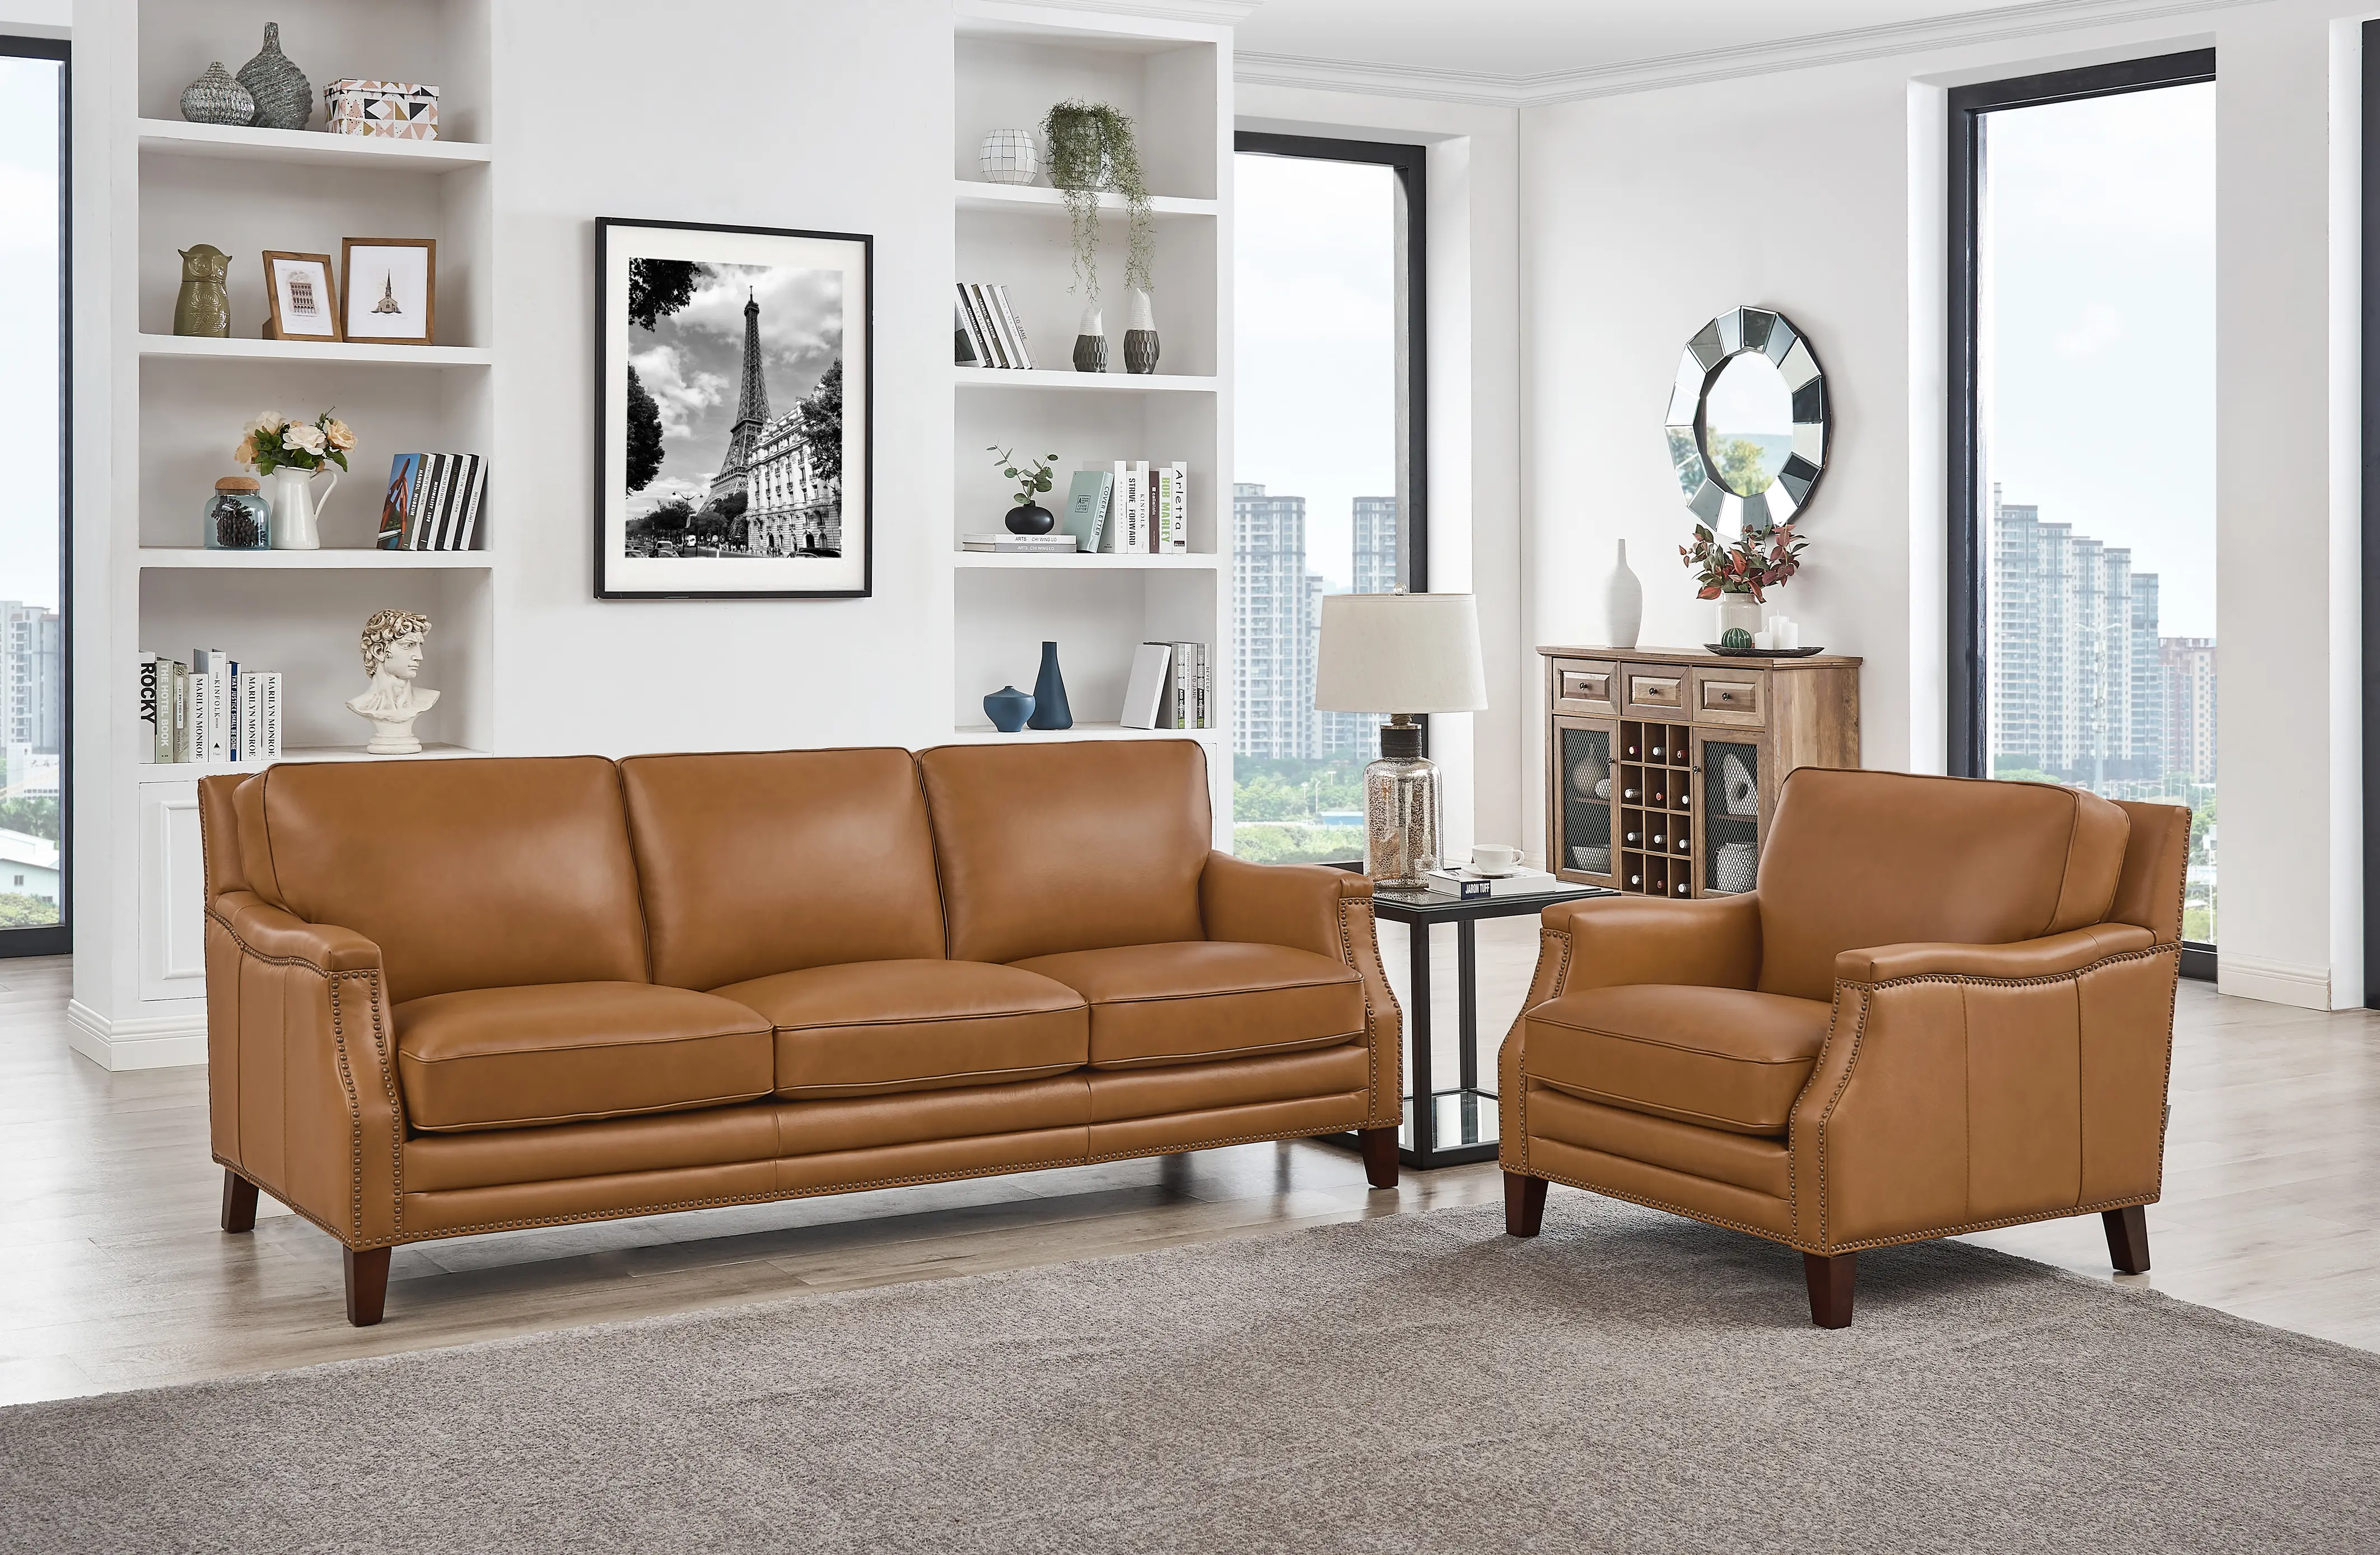 Romano Brown Leather 2 Piece Living Room Set - Sofa & Chair - Amax...